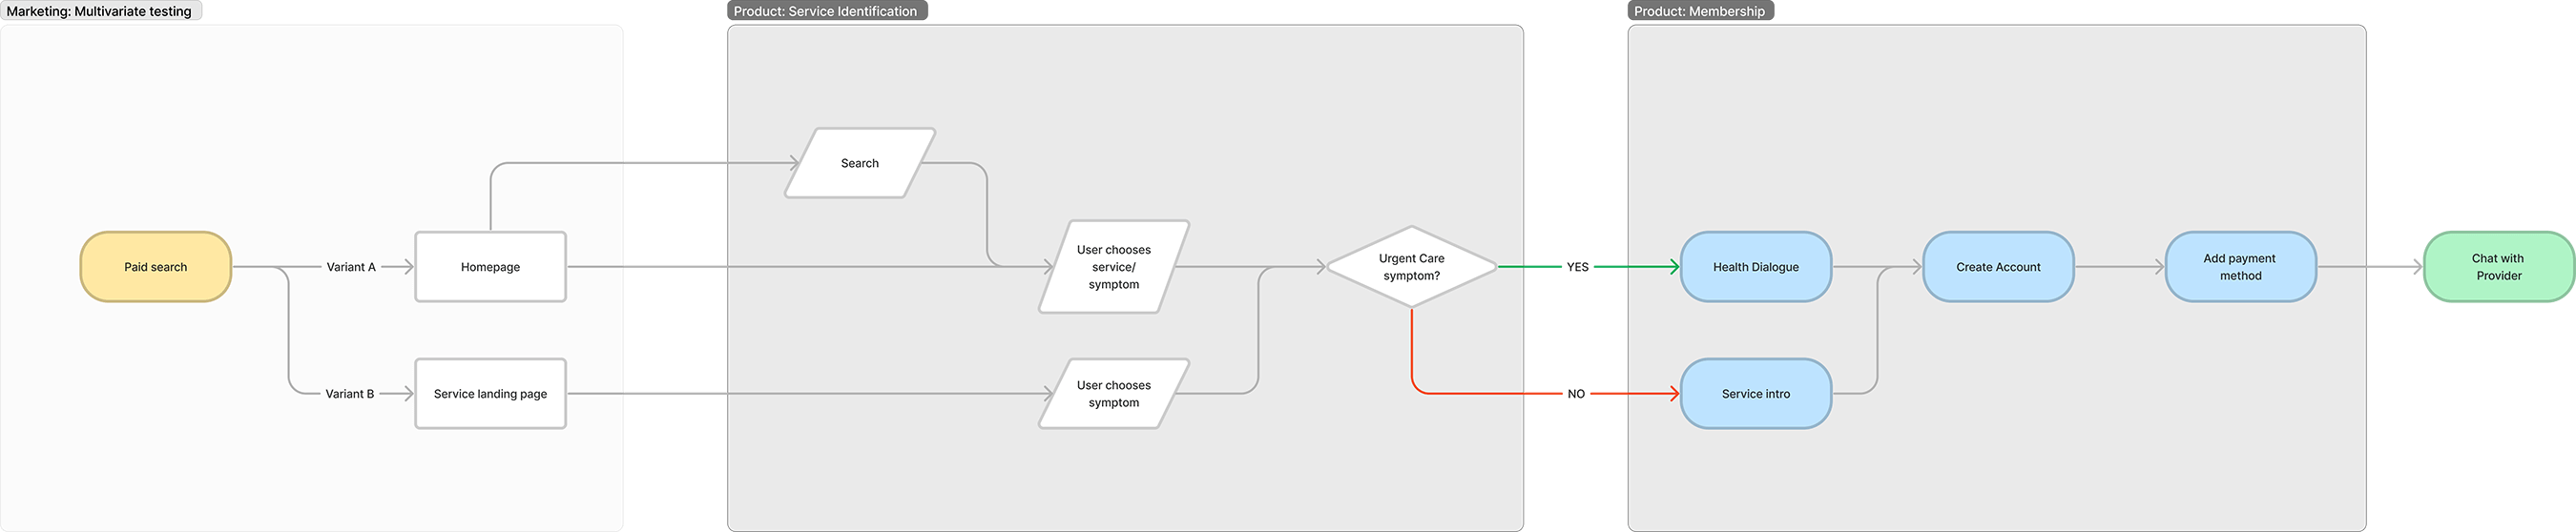 User flow depicting paths from Paid Search to Chat with Provider